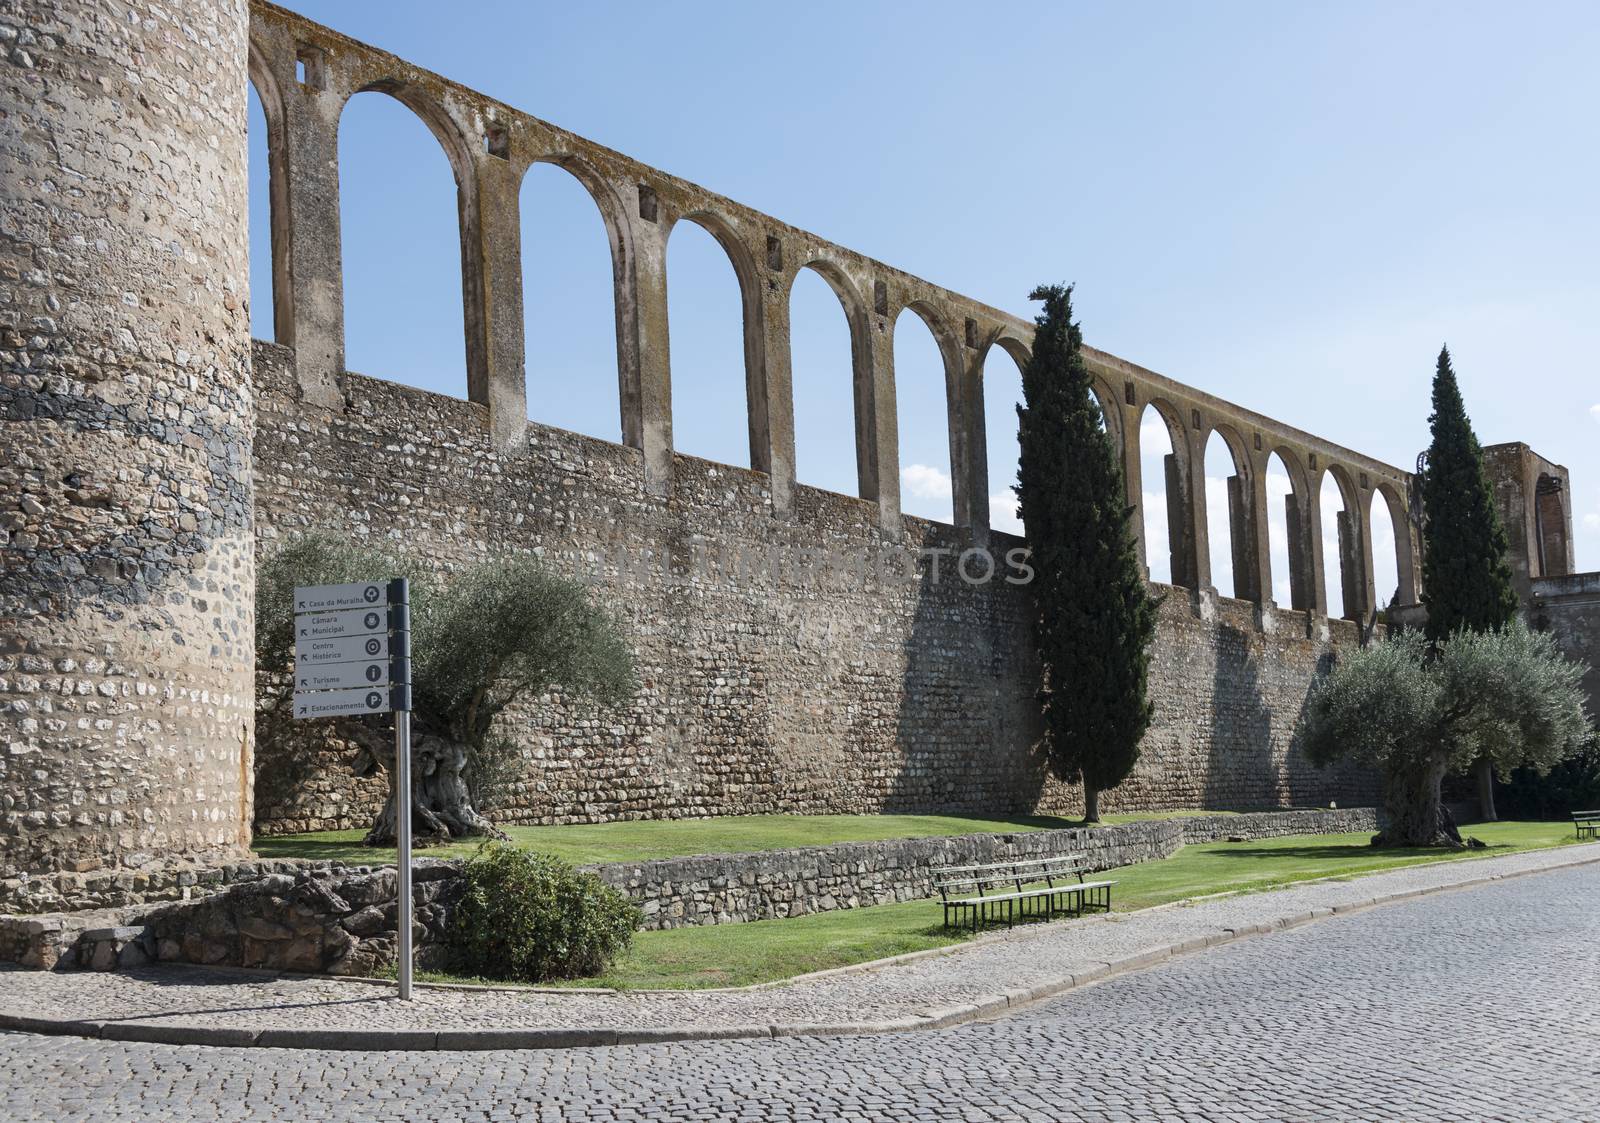 Silver Water Aqueduct in evora portugal, this is 500 years old